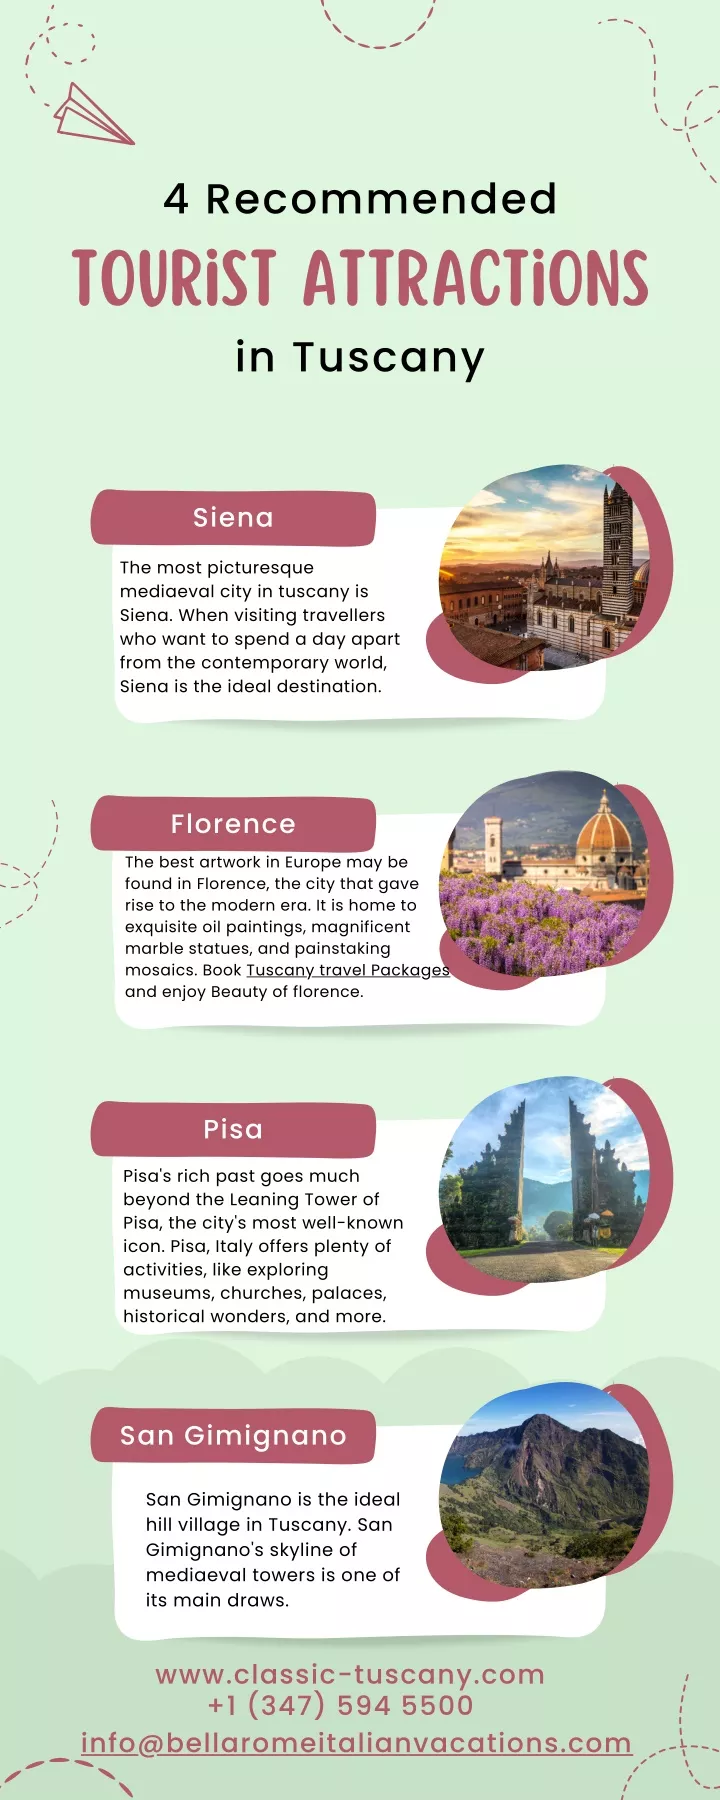 4 recommended tourist attractions in tuscany